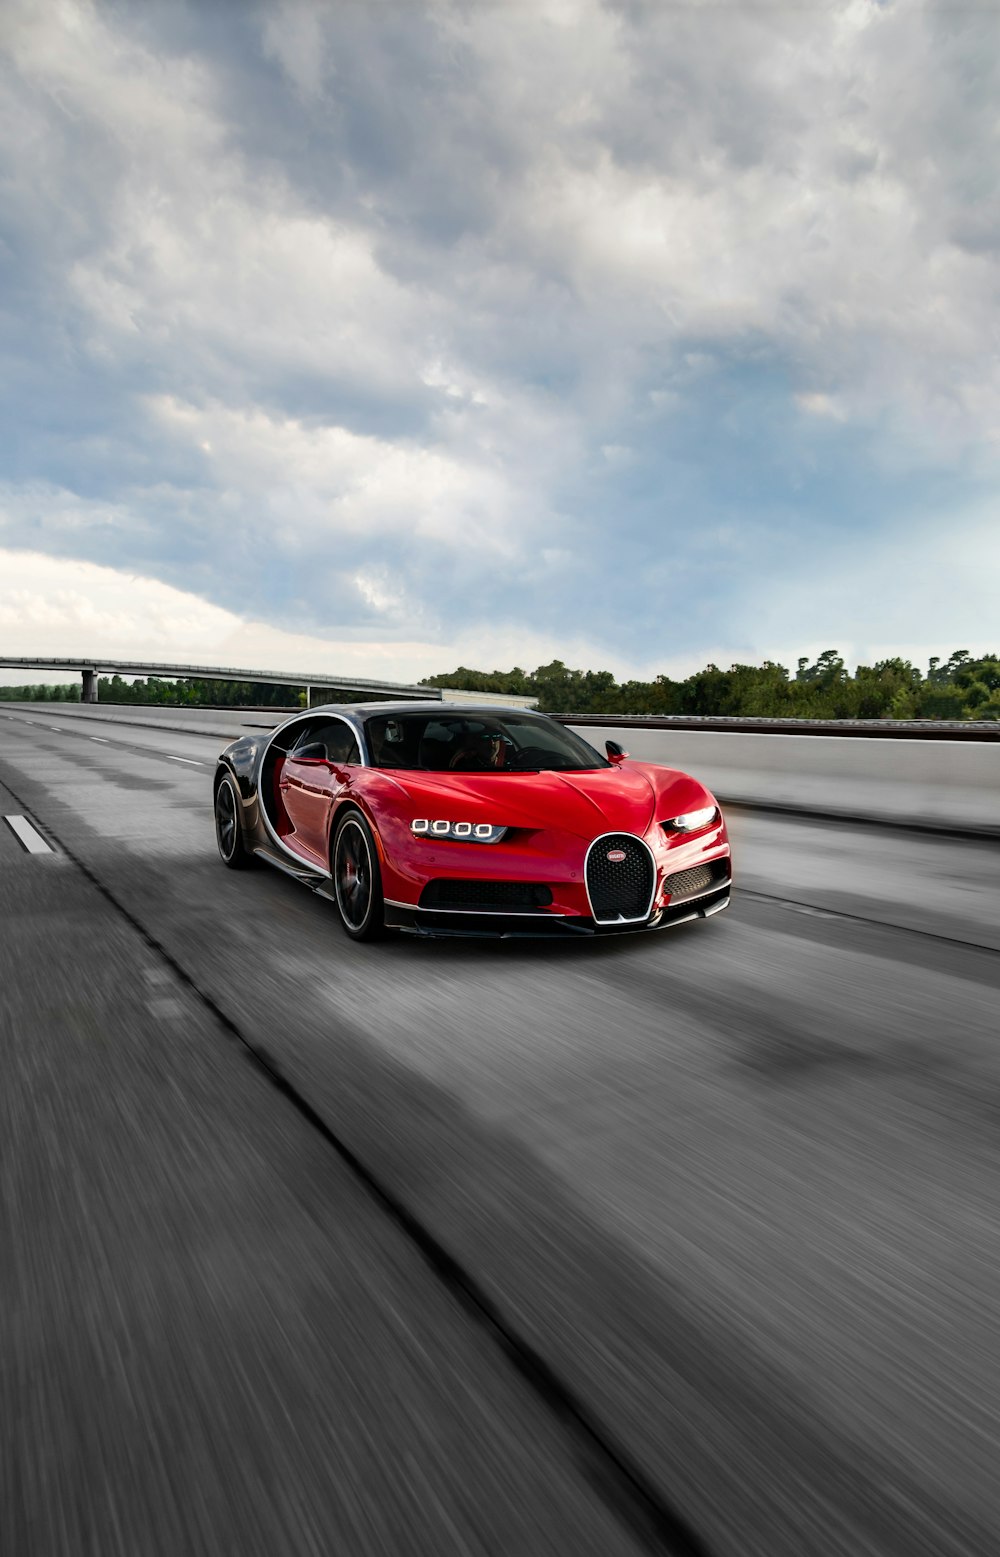 a red bugatti driving down a highway under a cloudy sky